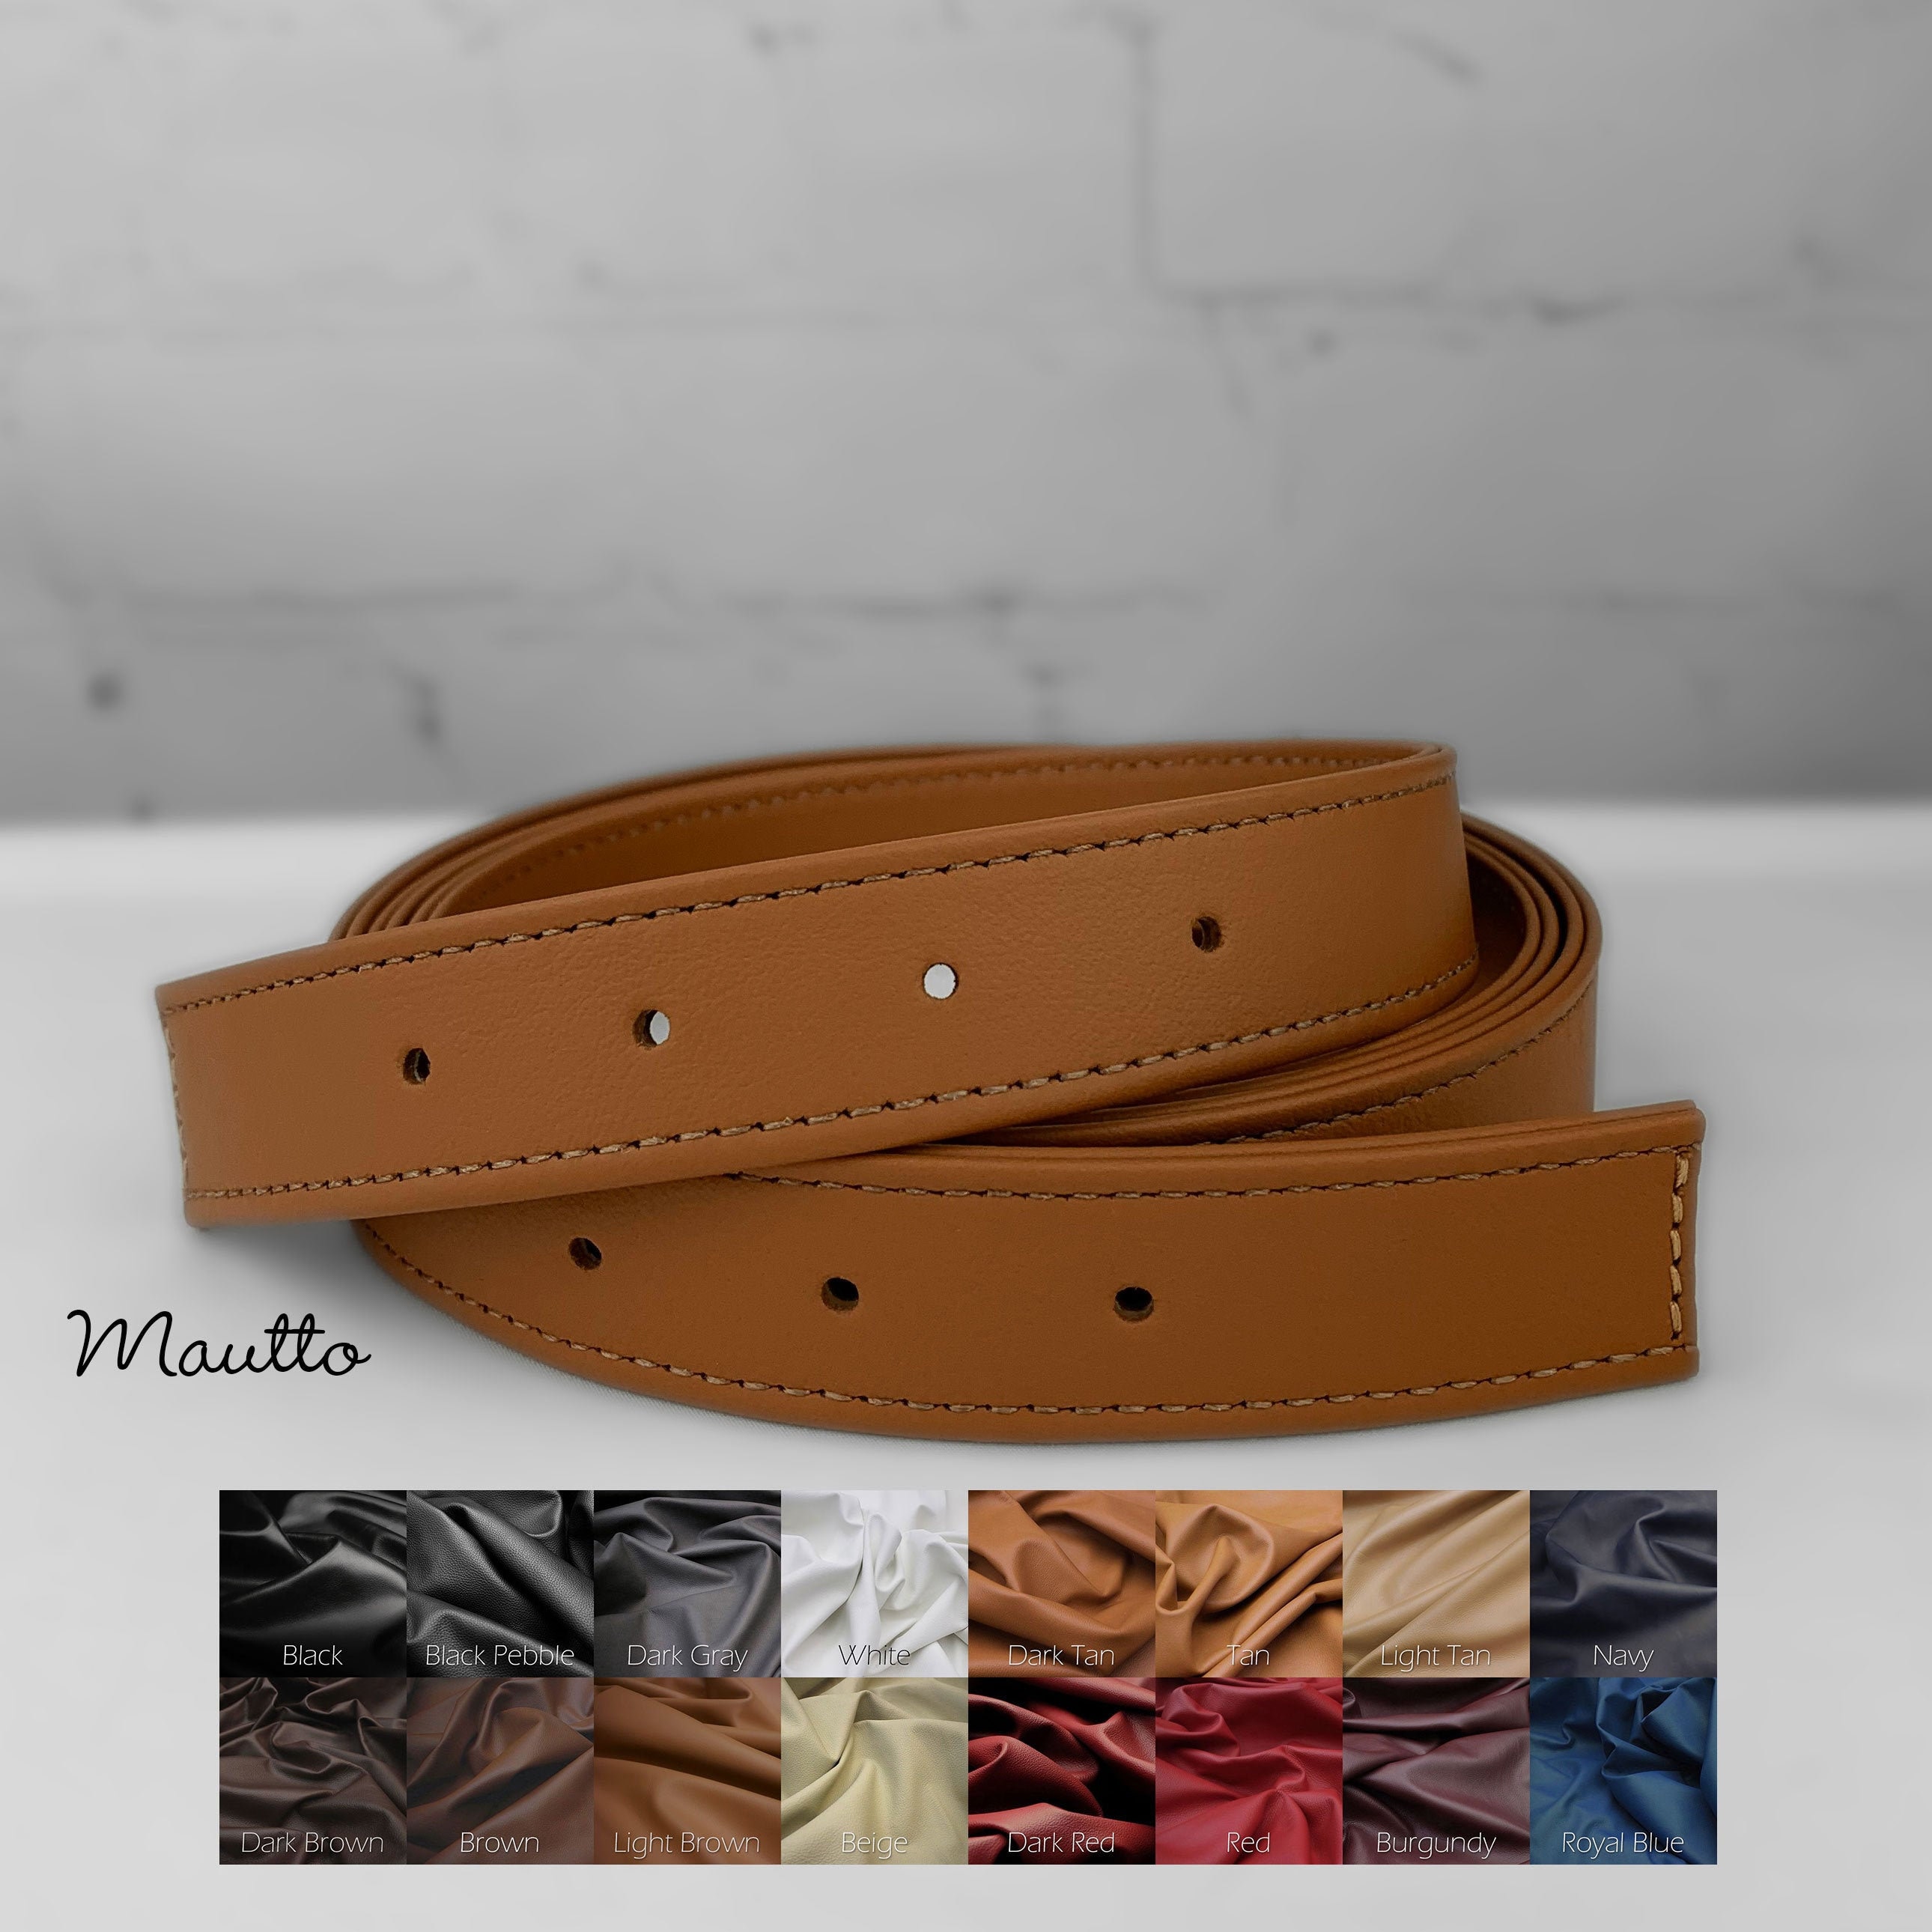 ON SALE! Genuine Leather Bag Strap - 1/2 Wide with Gold #16LG Clips -  Choose Length & Leather Color